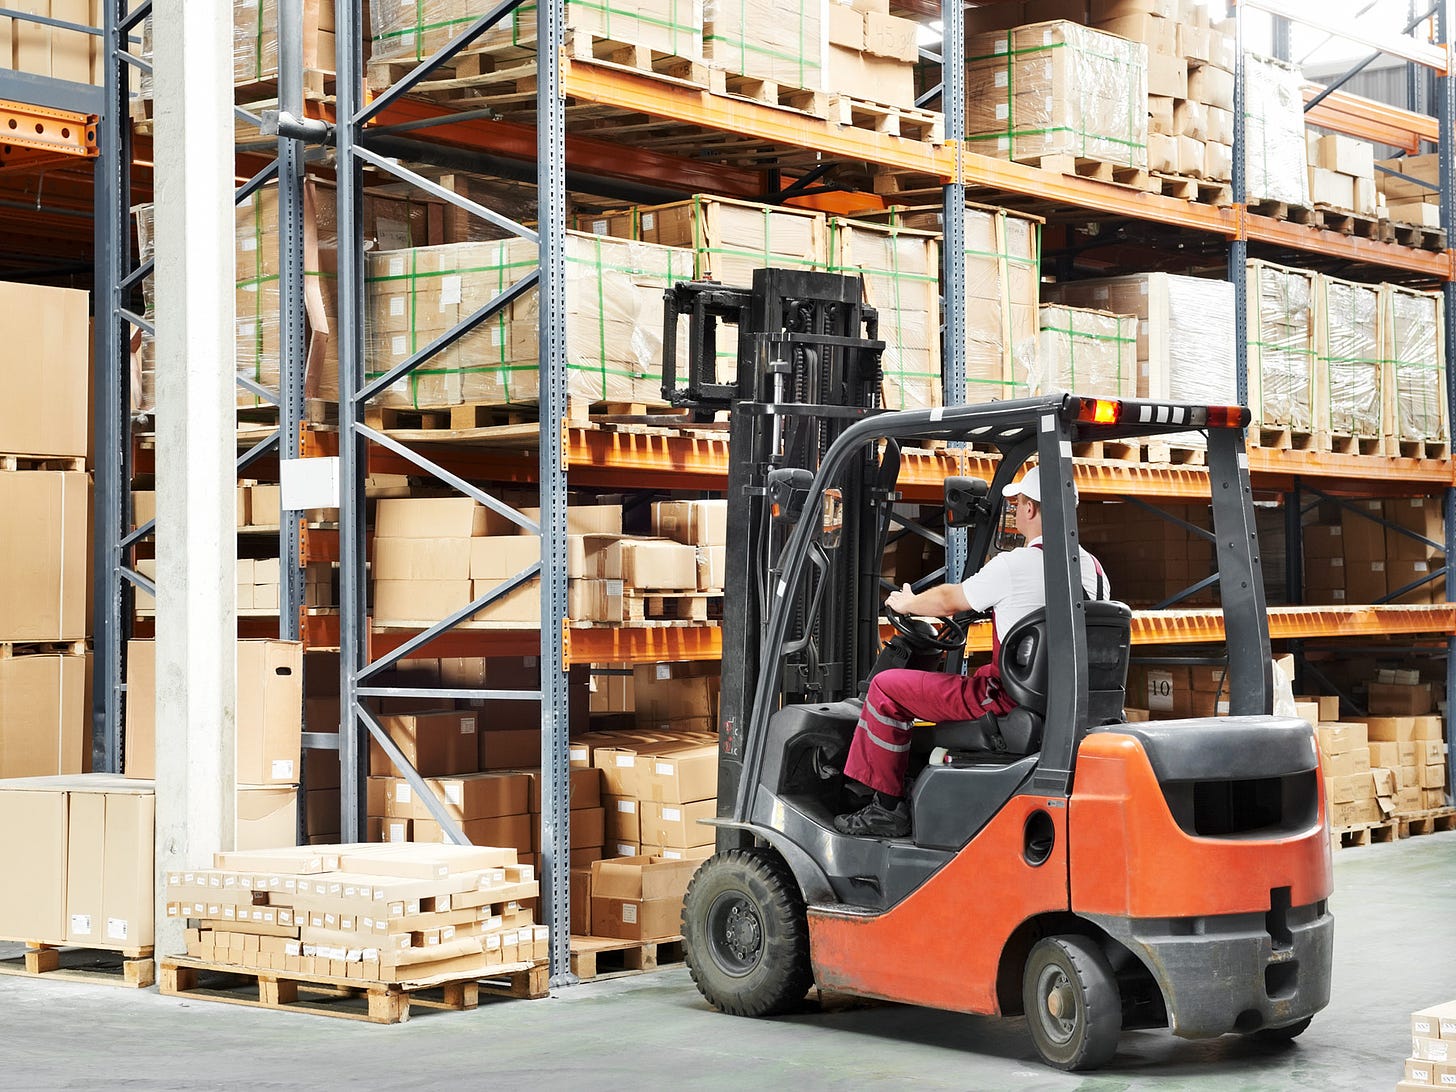 Forklift Dimensions: What Size Do You Need? | BigRentz